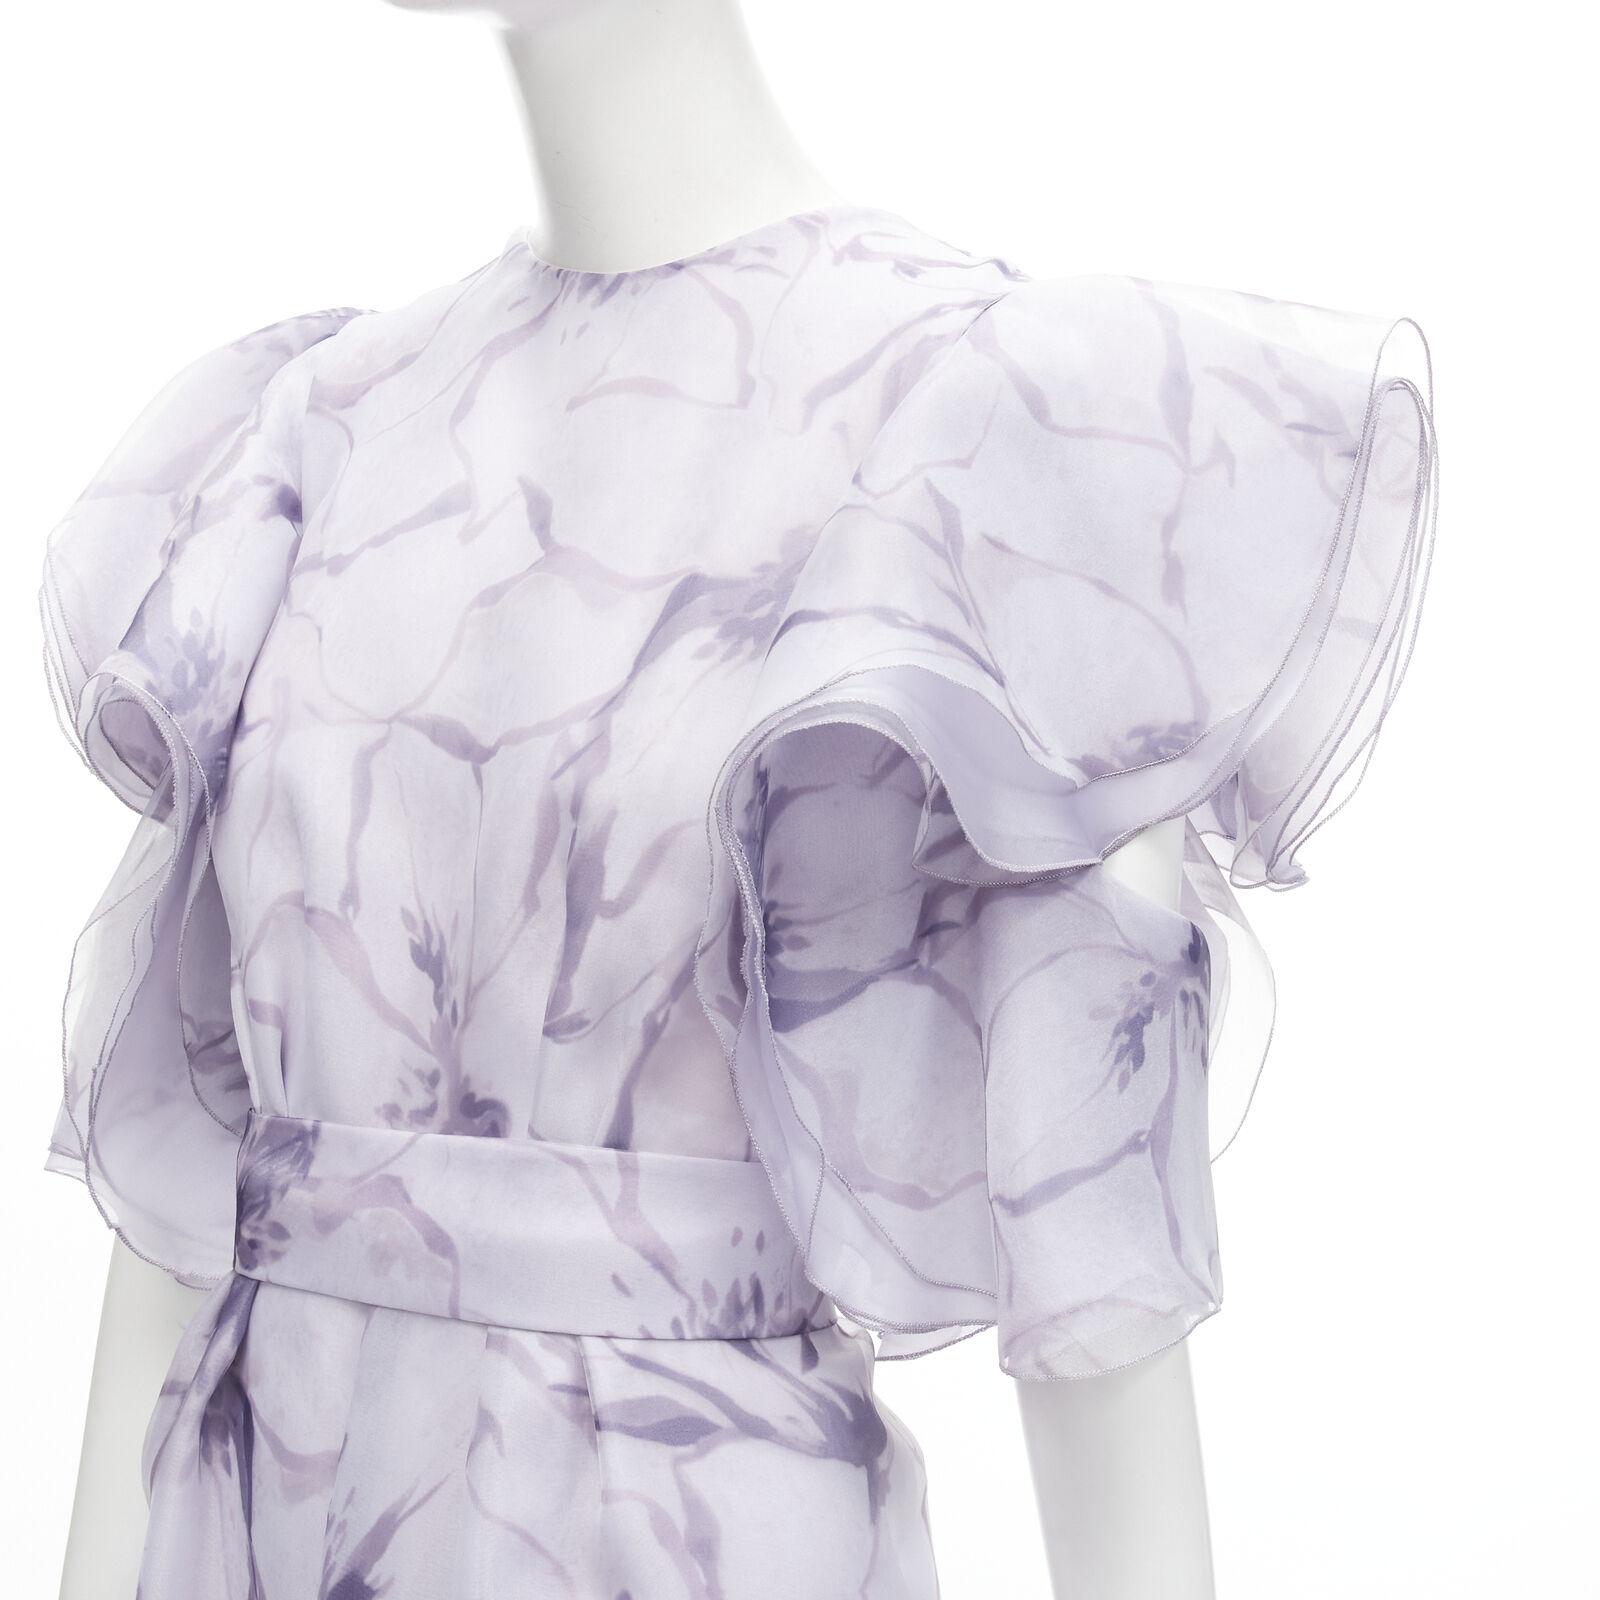 COSTARELLOS purple floral ruffled butterfly sleeves belted jumpsuit FR34 XS
Reference: AAWC/A00194
Brand: Costarellos
Material: Polyester, Silk
Color: Purple
Pattern: Floral
Closure: Zip
Lining: Fabric
Extra Details: Detachable belt with hook eye